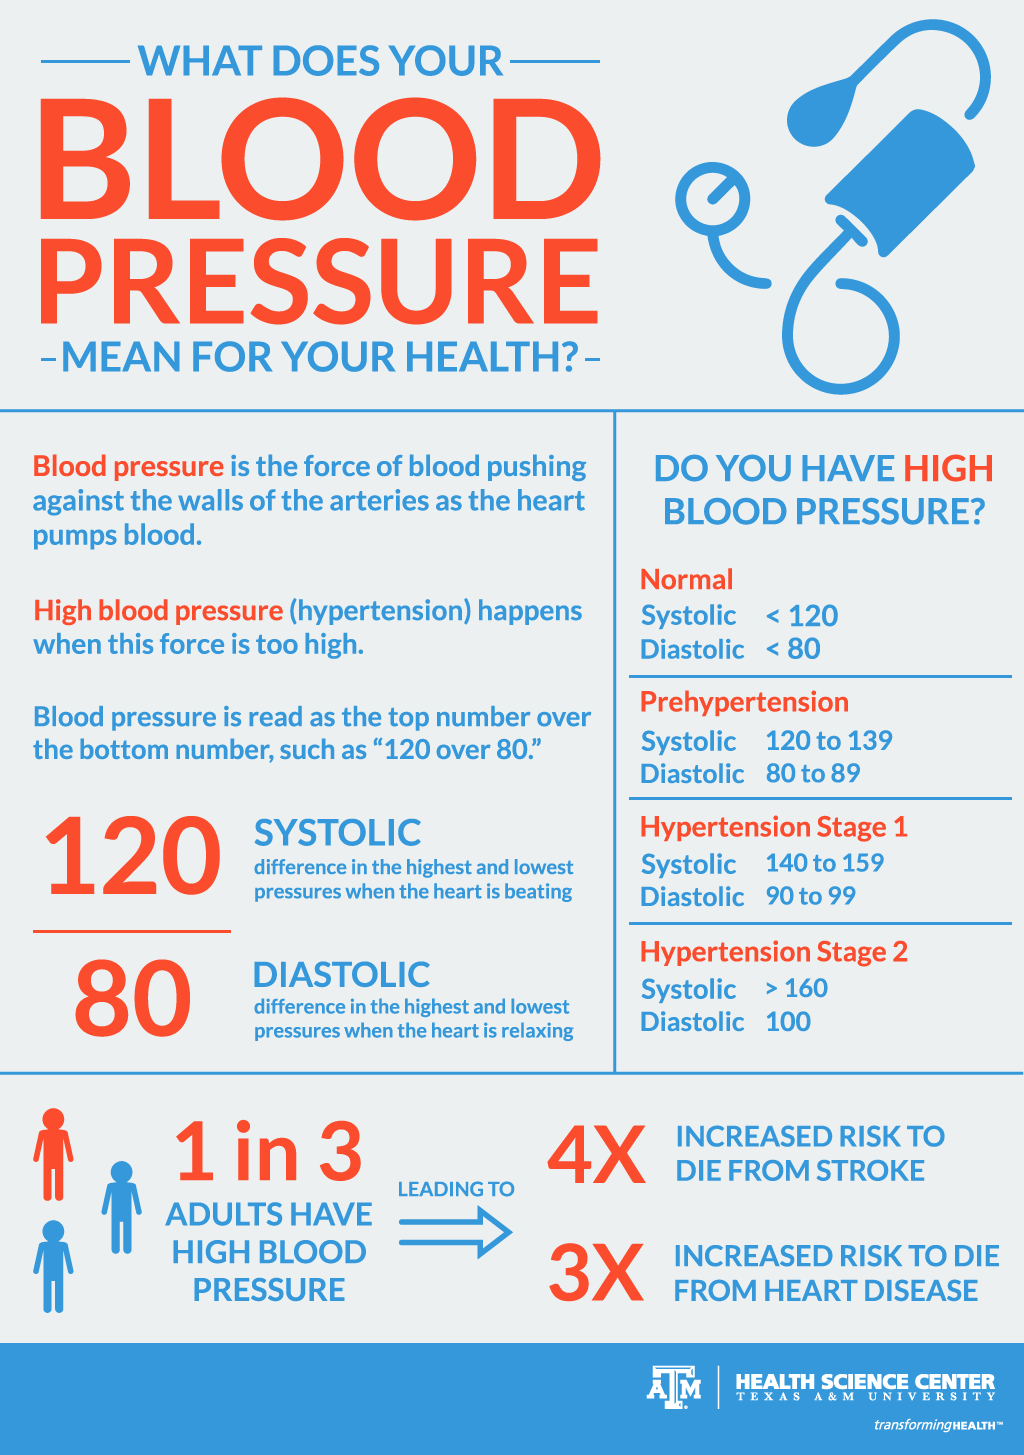 What does your blood pressure reading mean for your health?